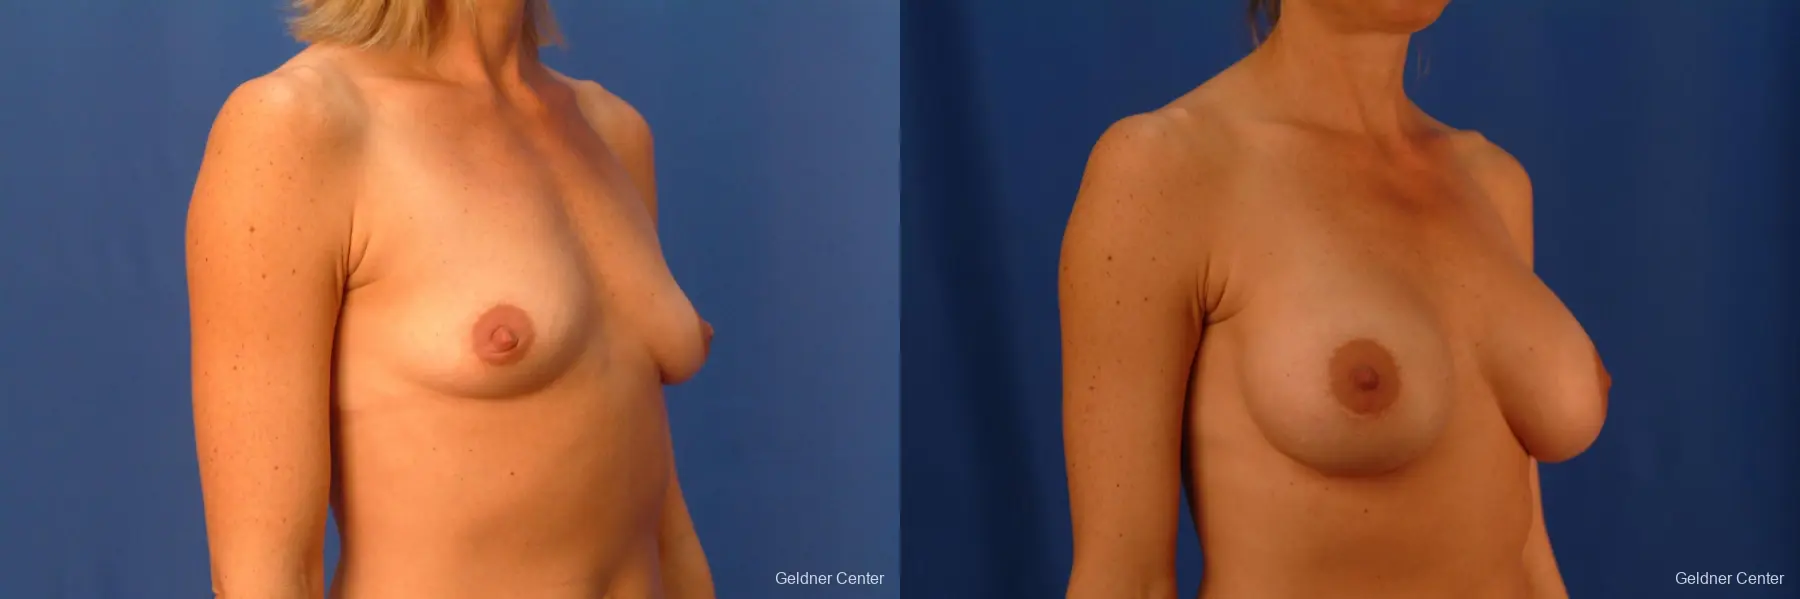 Breast Augmentation Lake Shore Dr, Chicago 2446 - Before and After 2